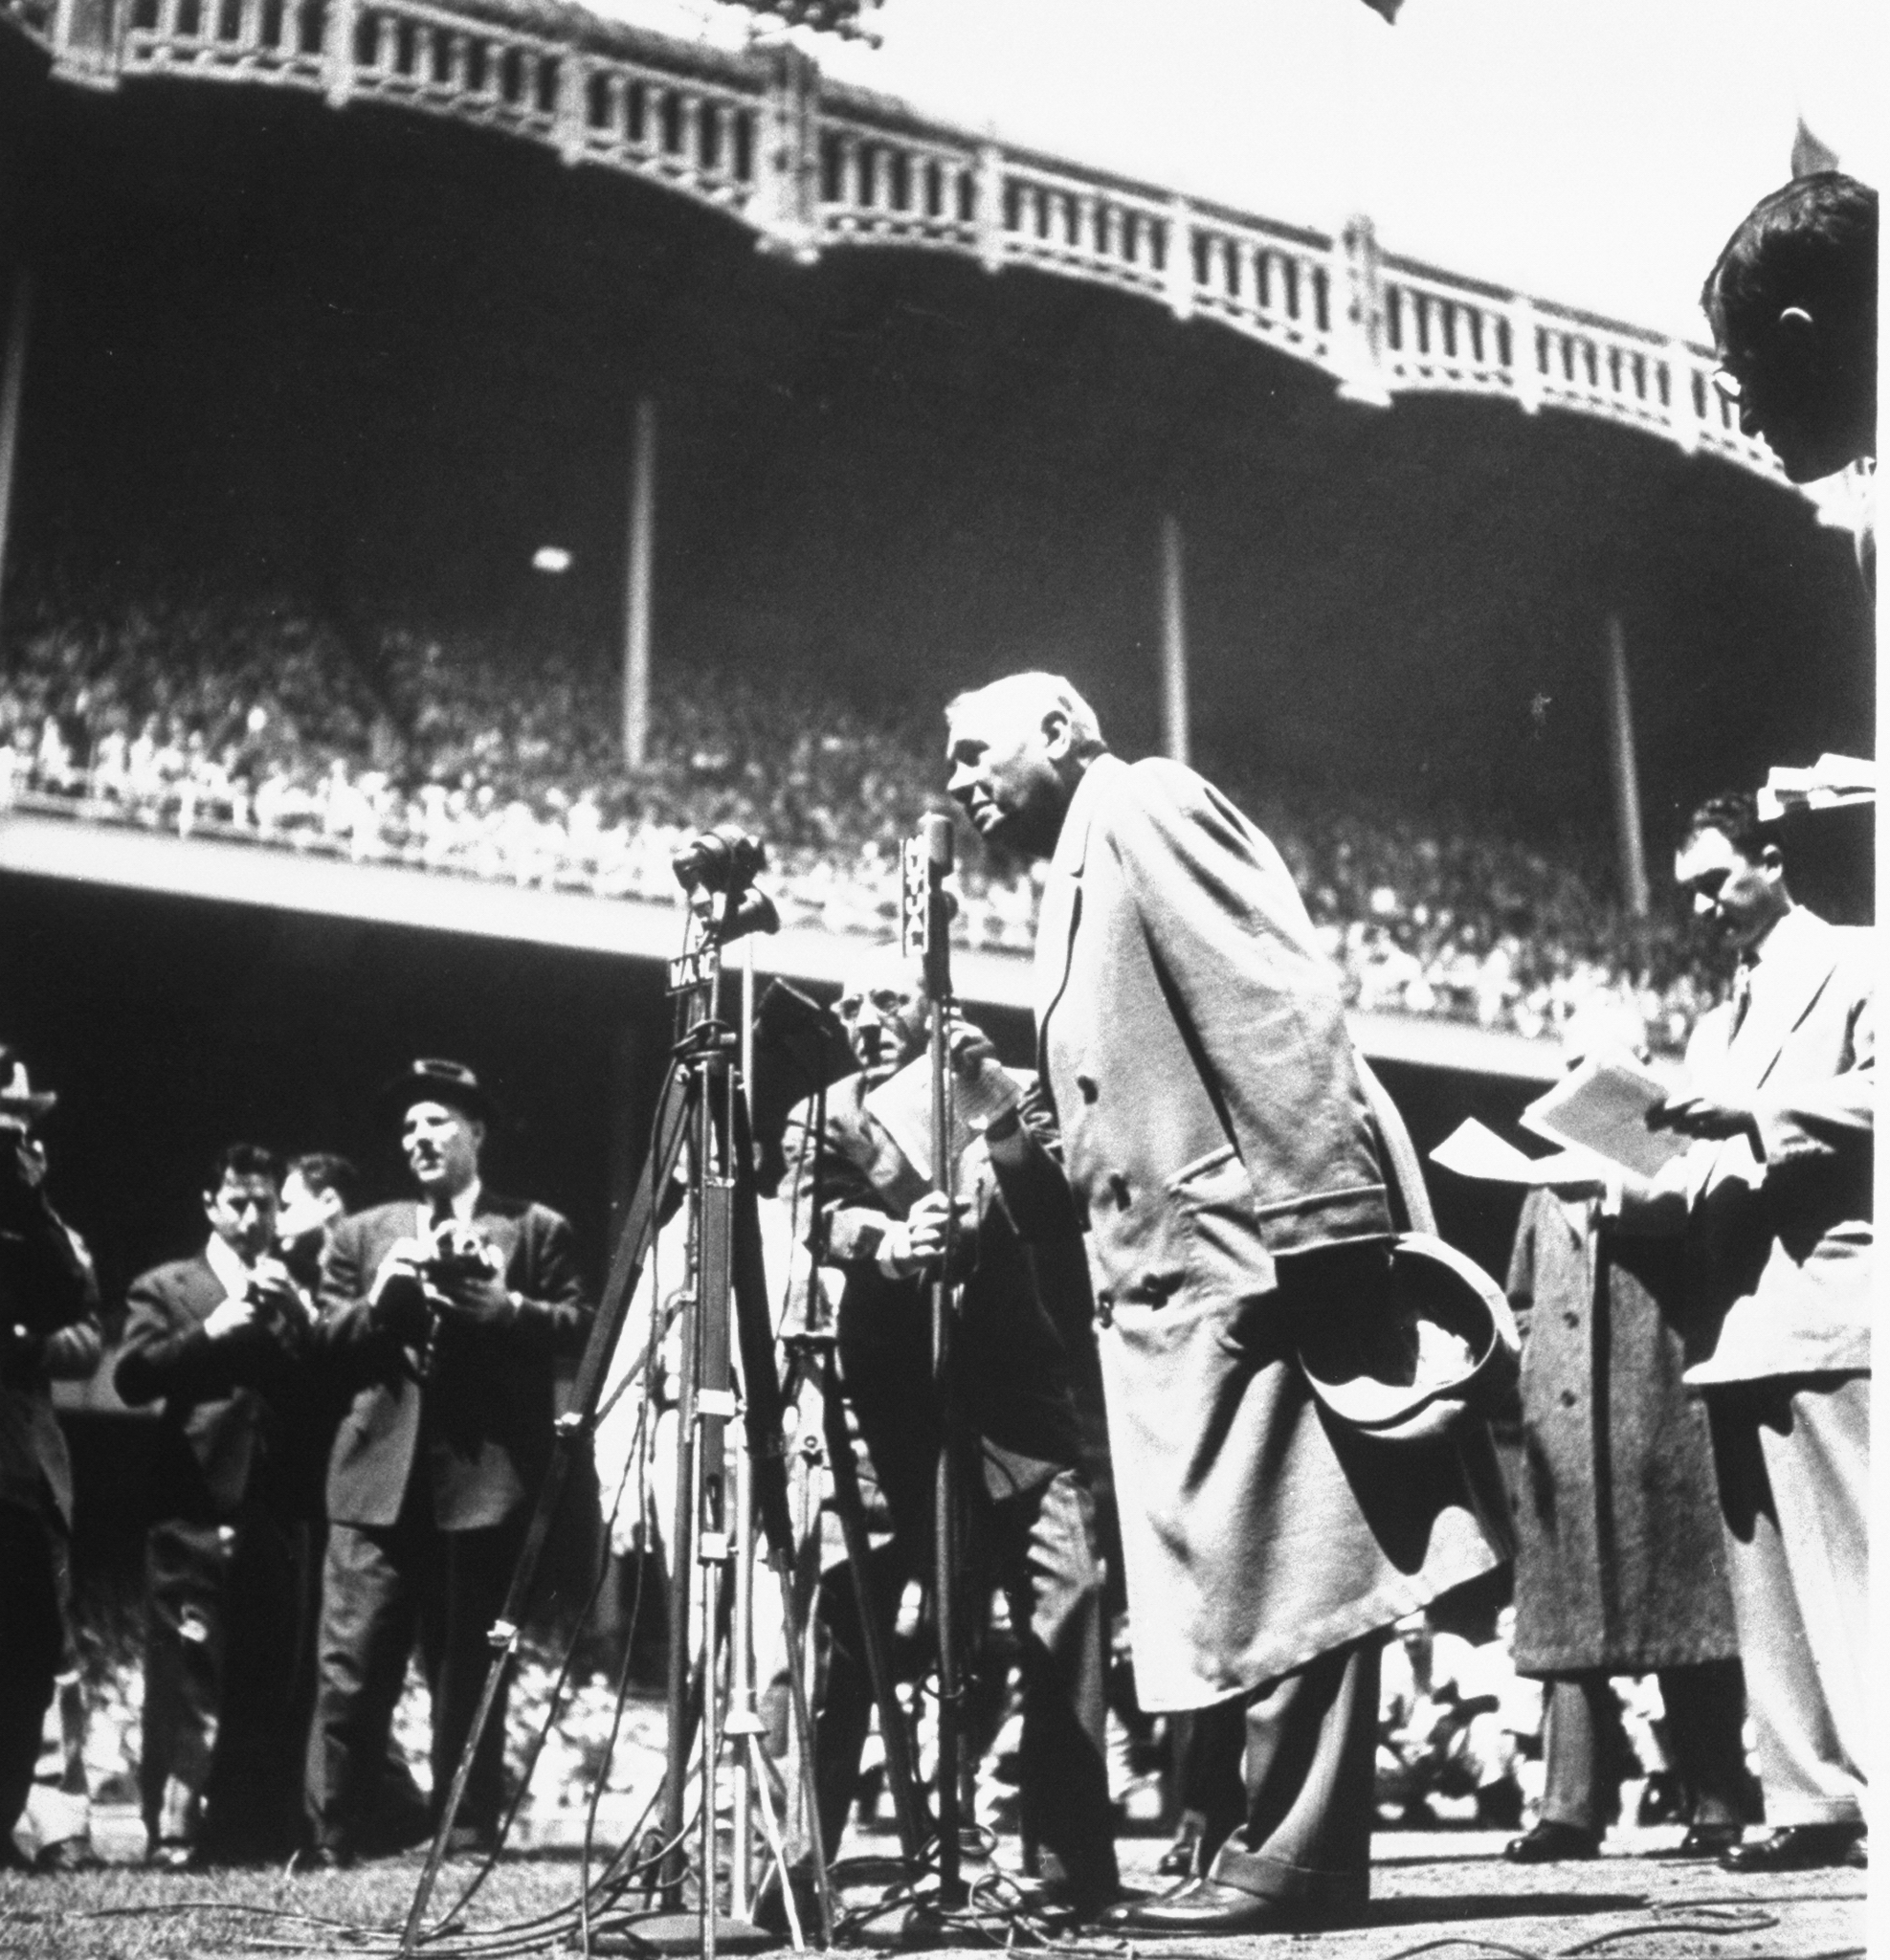 An ailing Babe Ruth thanking crowd during Babe Ruth Day at Yankee Stadium in 1947 (Ralph Morse—The LIFE Picture Collection/Getty Images)